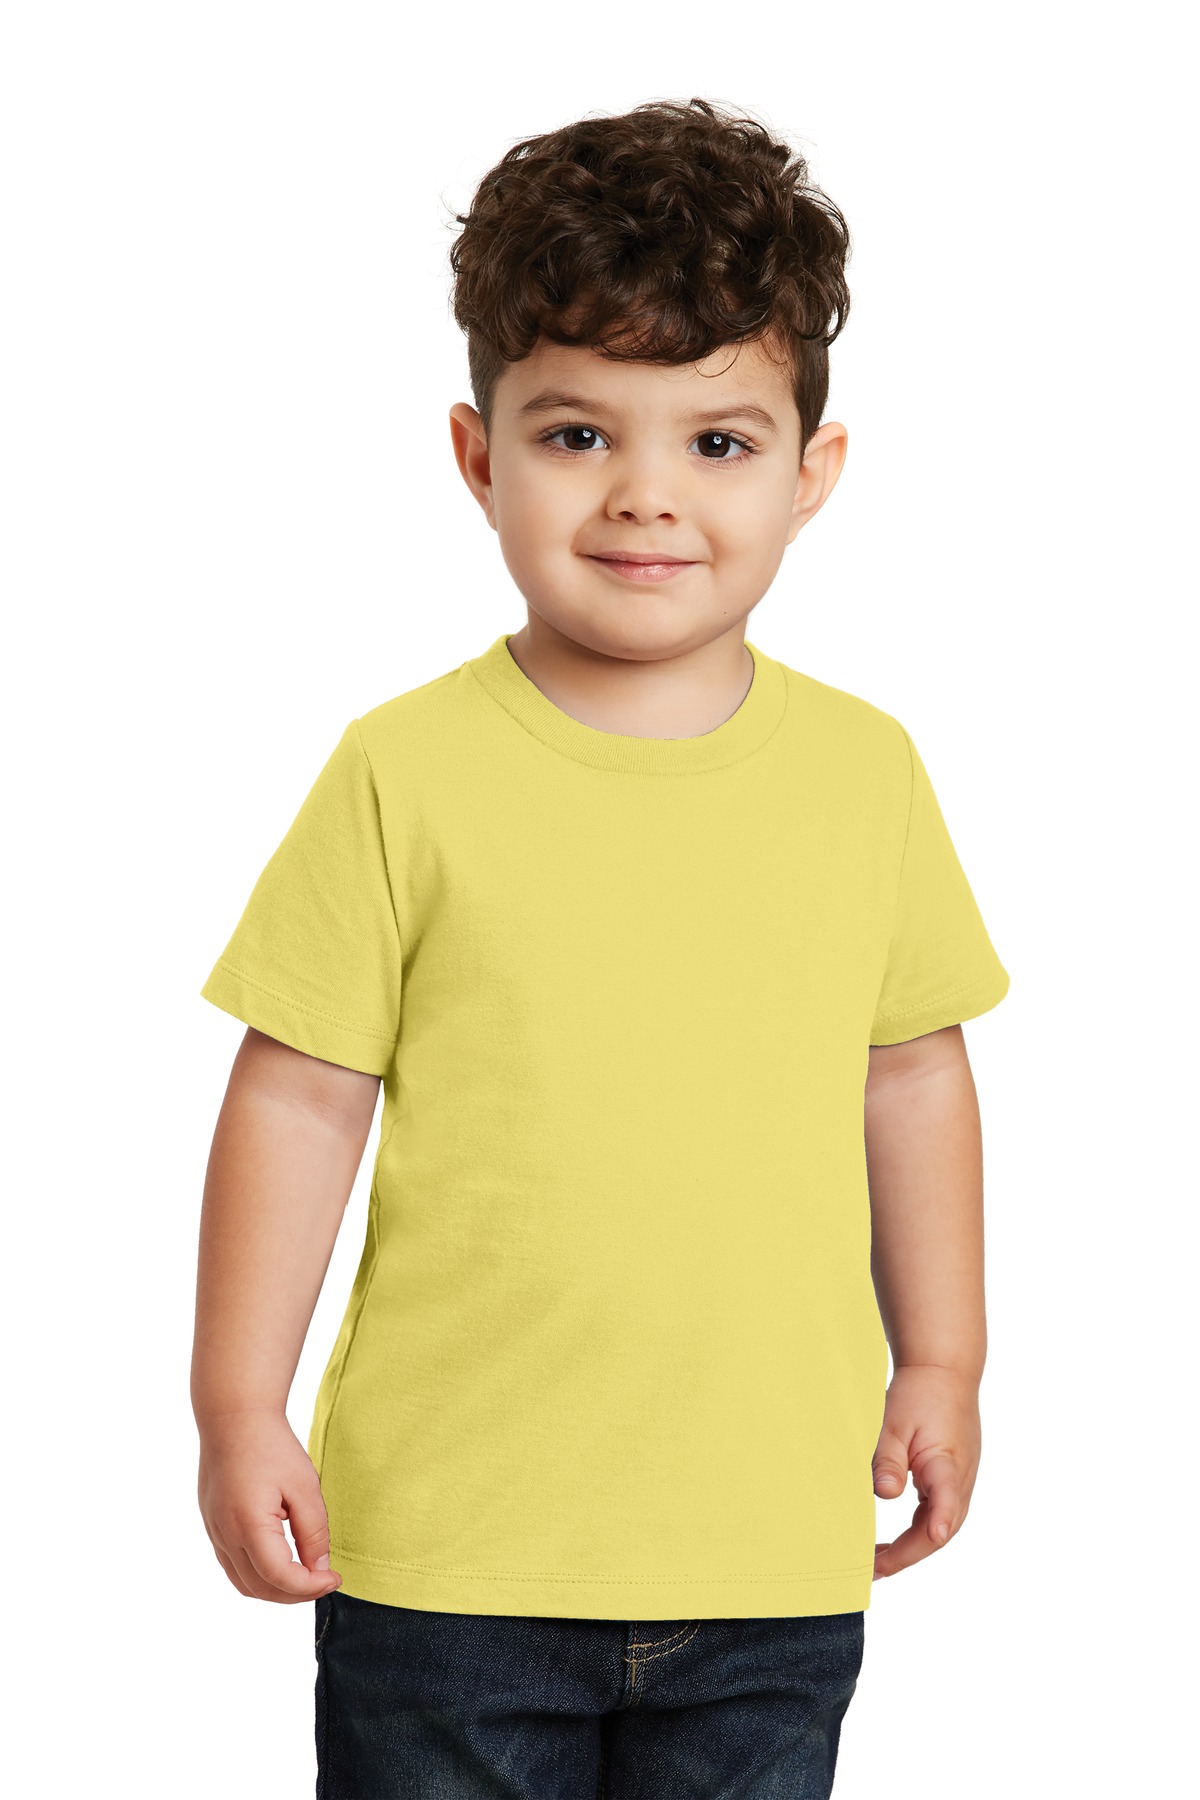 Port and Company Toddler Fan Favorite Tee. PC450TD